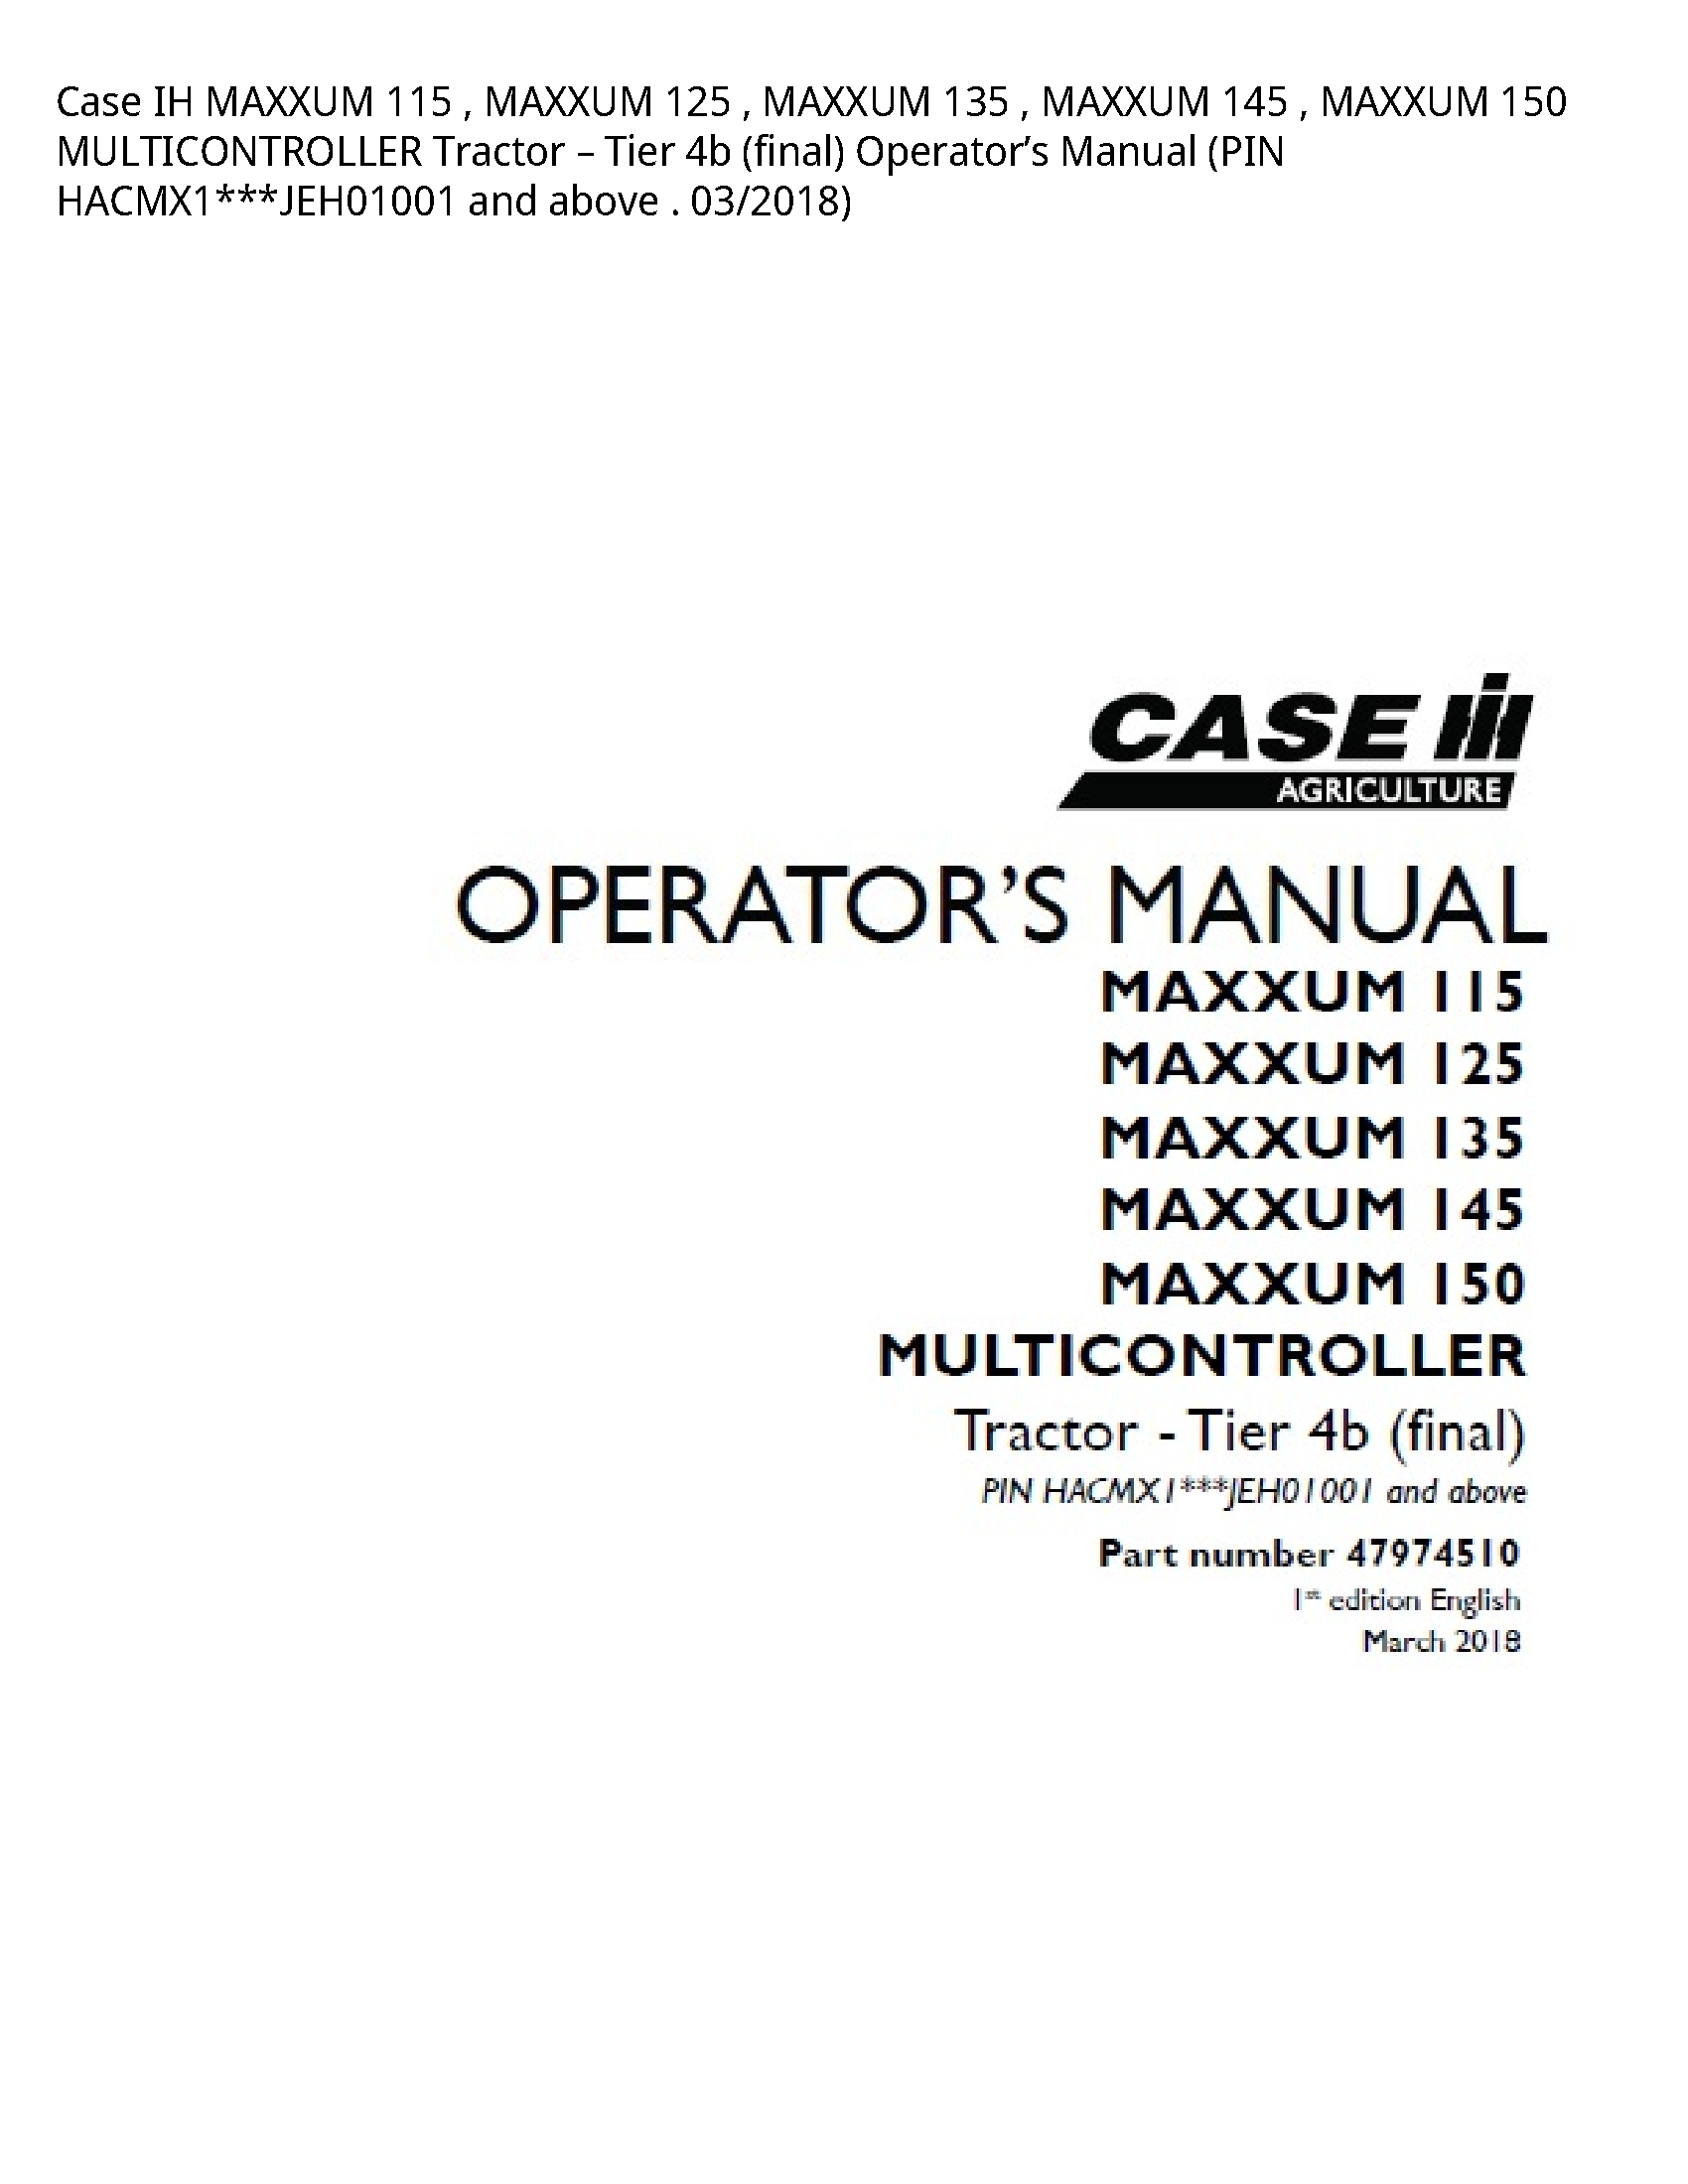 Case/Case IH 115 IH MAXXUM MAXXUM MAXXUM MAXXUM MAXXUM MULTICONTROLLER Tractor Tier (final) Operator’s manual